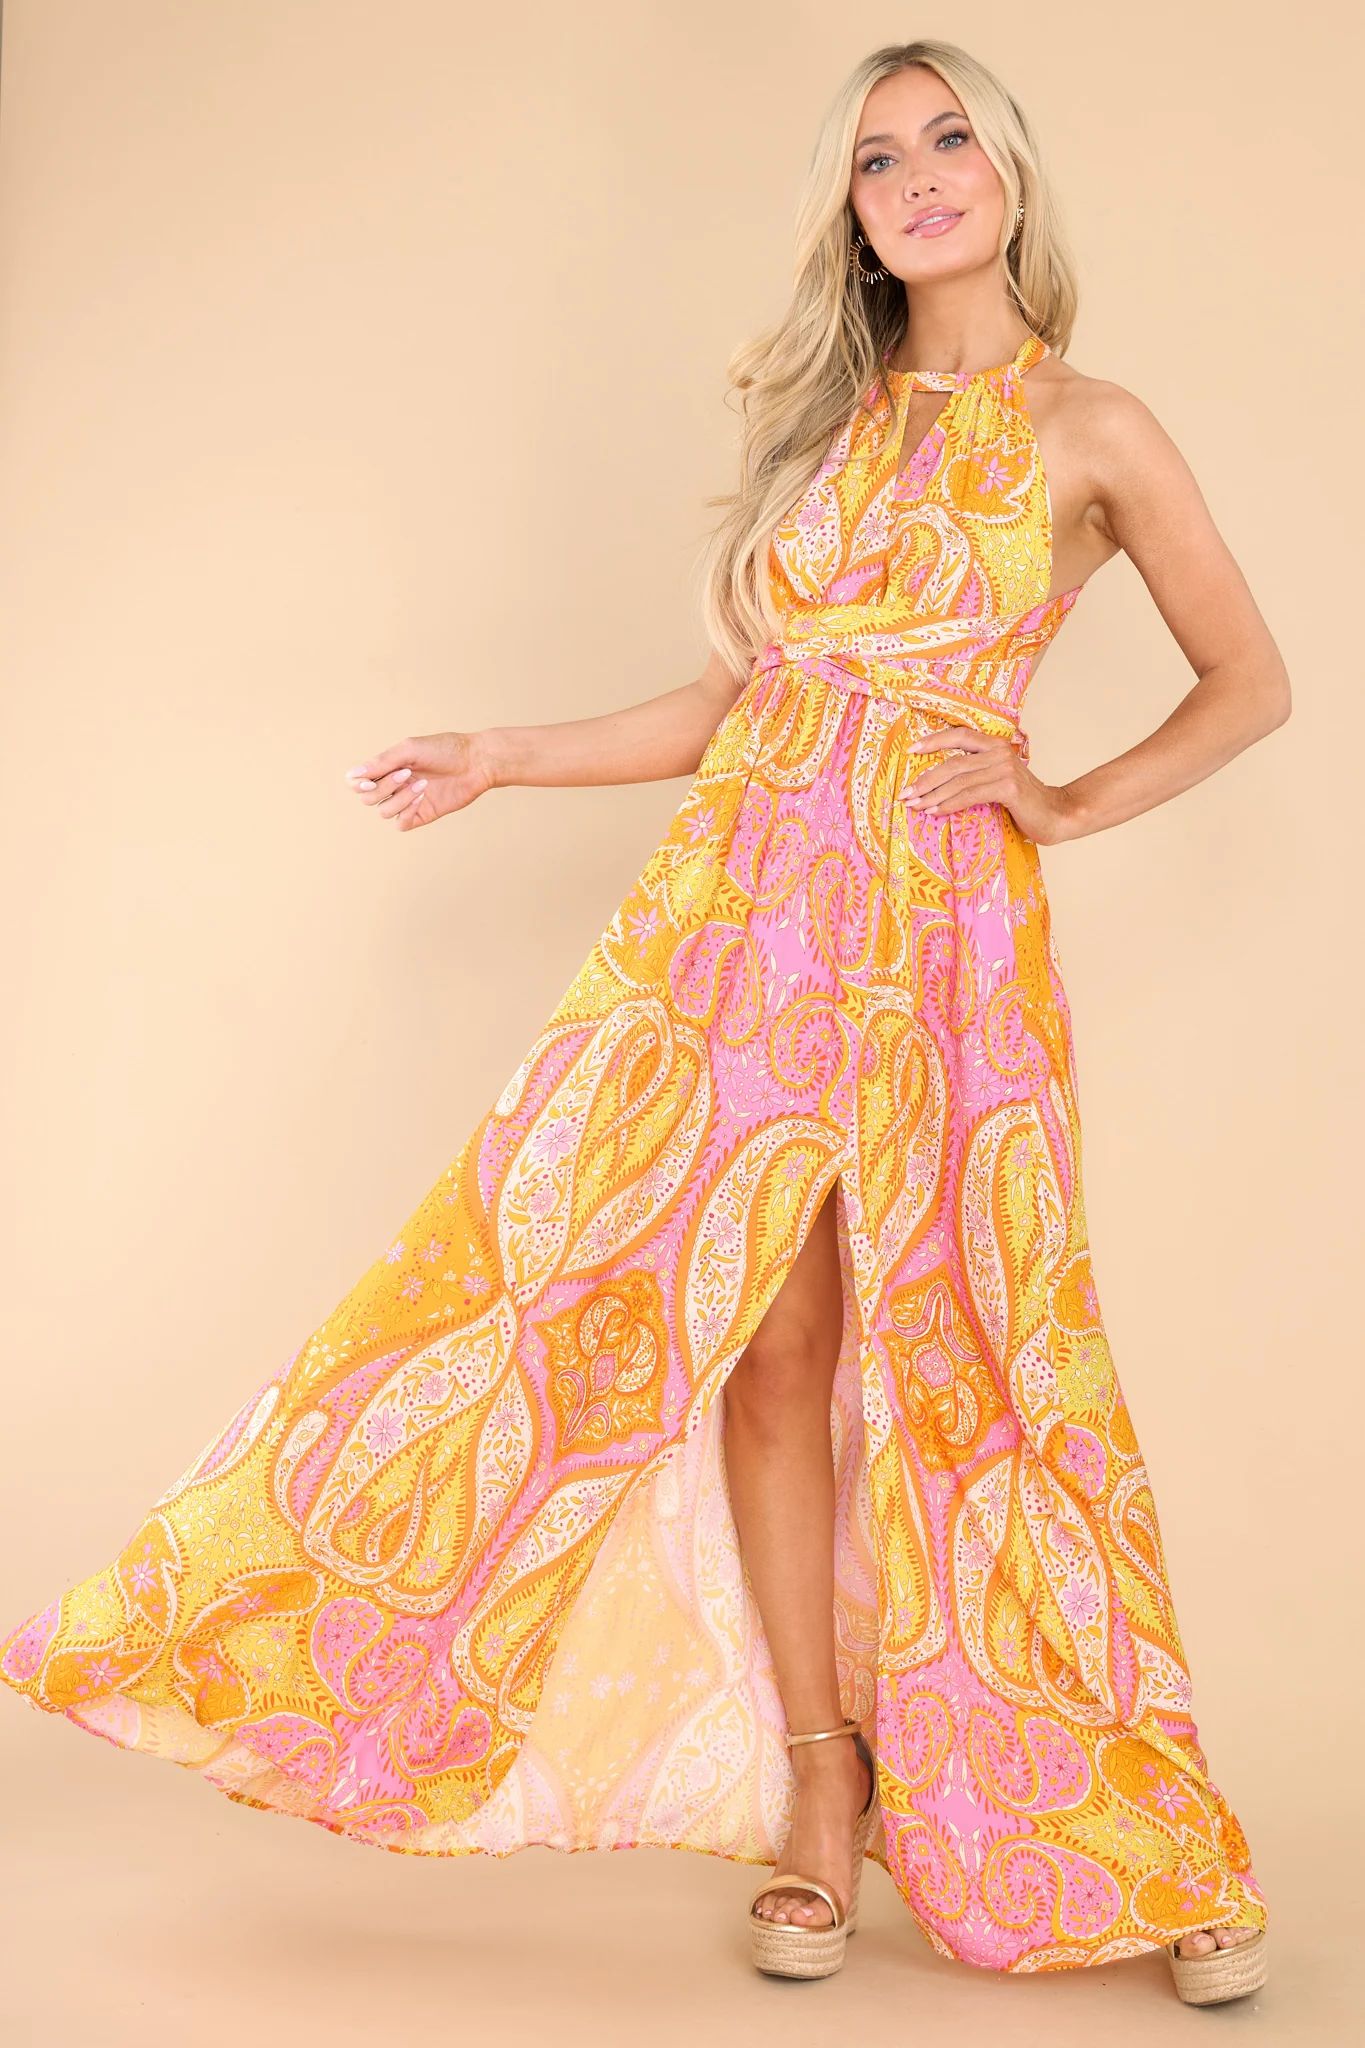 Meant For Me Tangerine Print Maxi Dress | Red Dress 